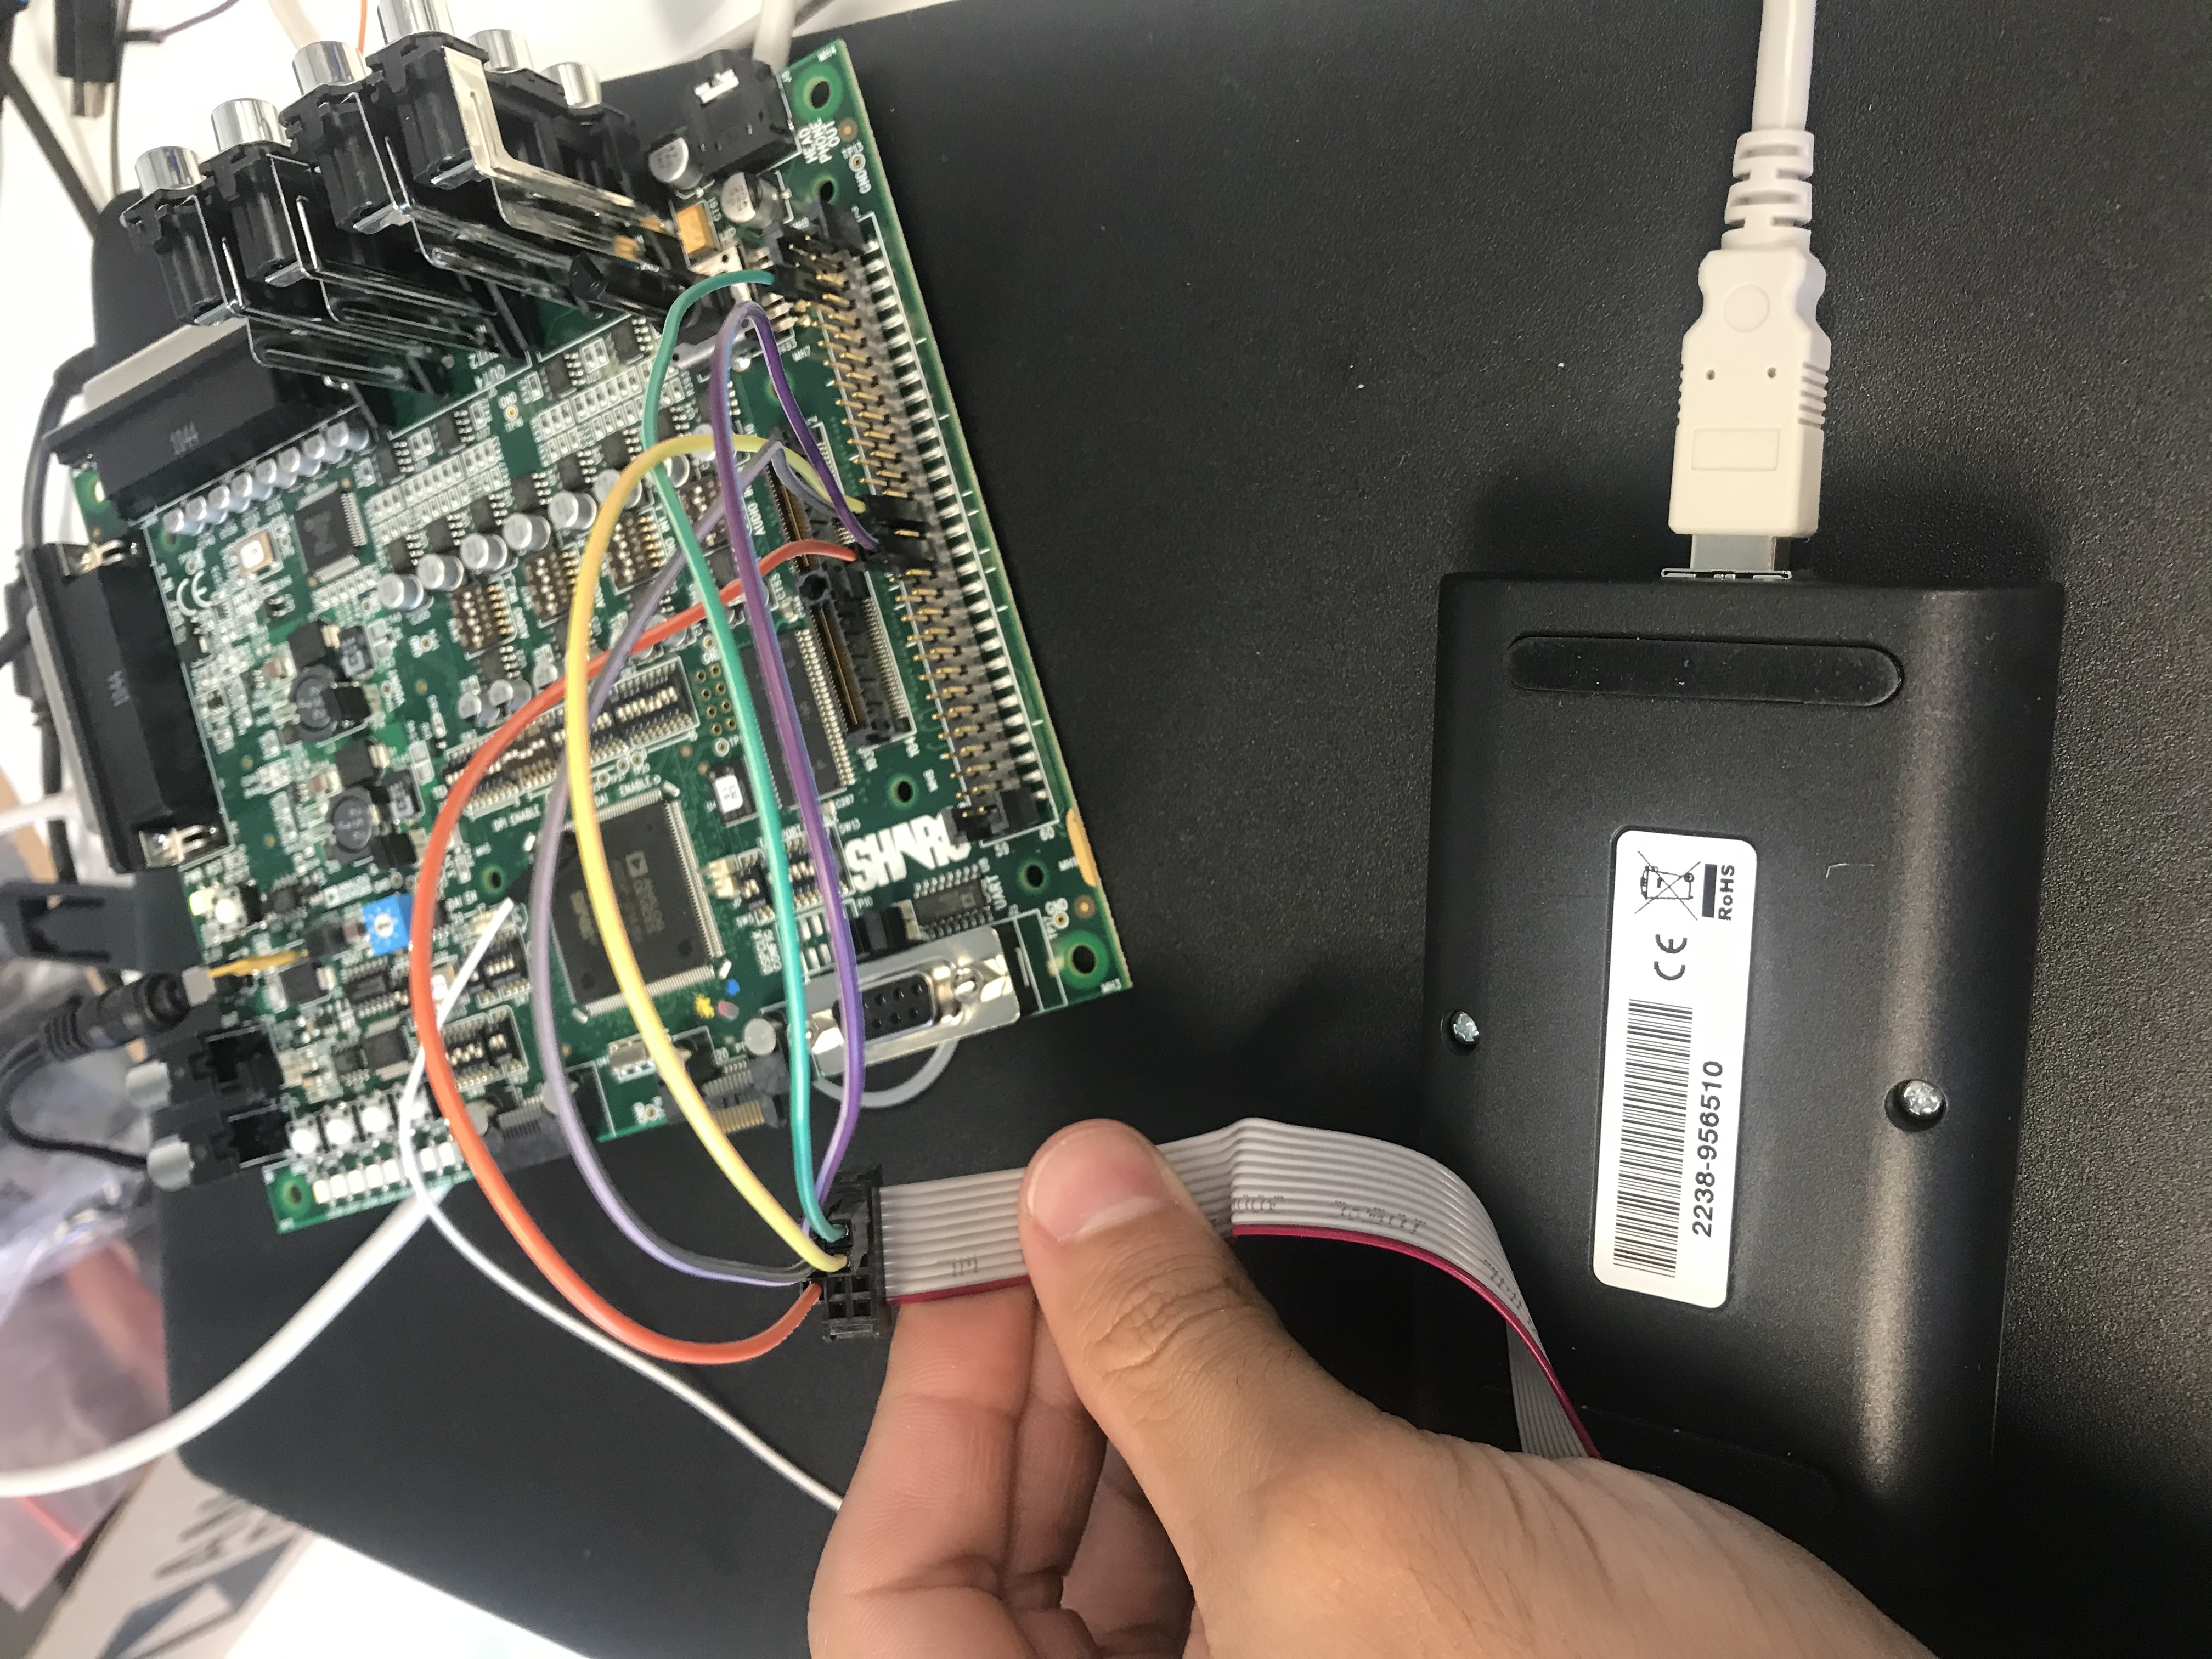 Cannot Connect to ADSP-21489 EZ-KIT | DSP Concepts